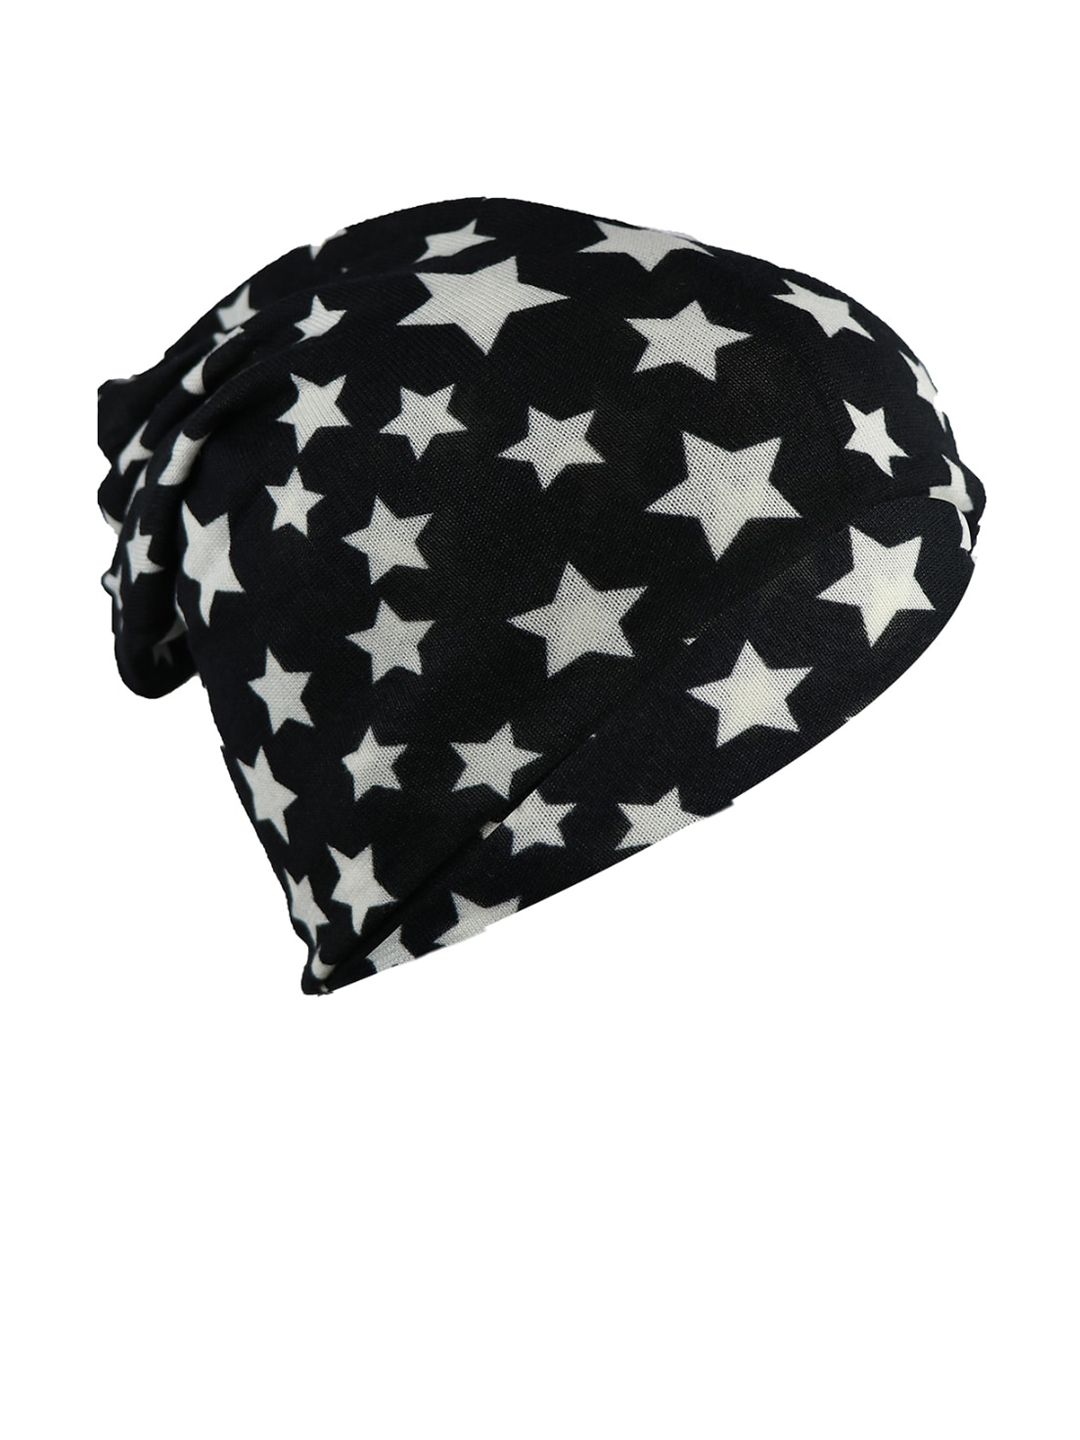 iSWEVEN Unisex Black & White Printed Beanie Price in India